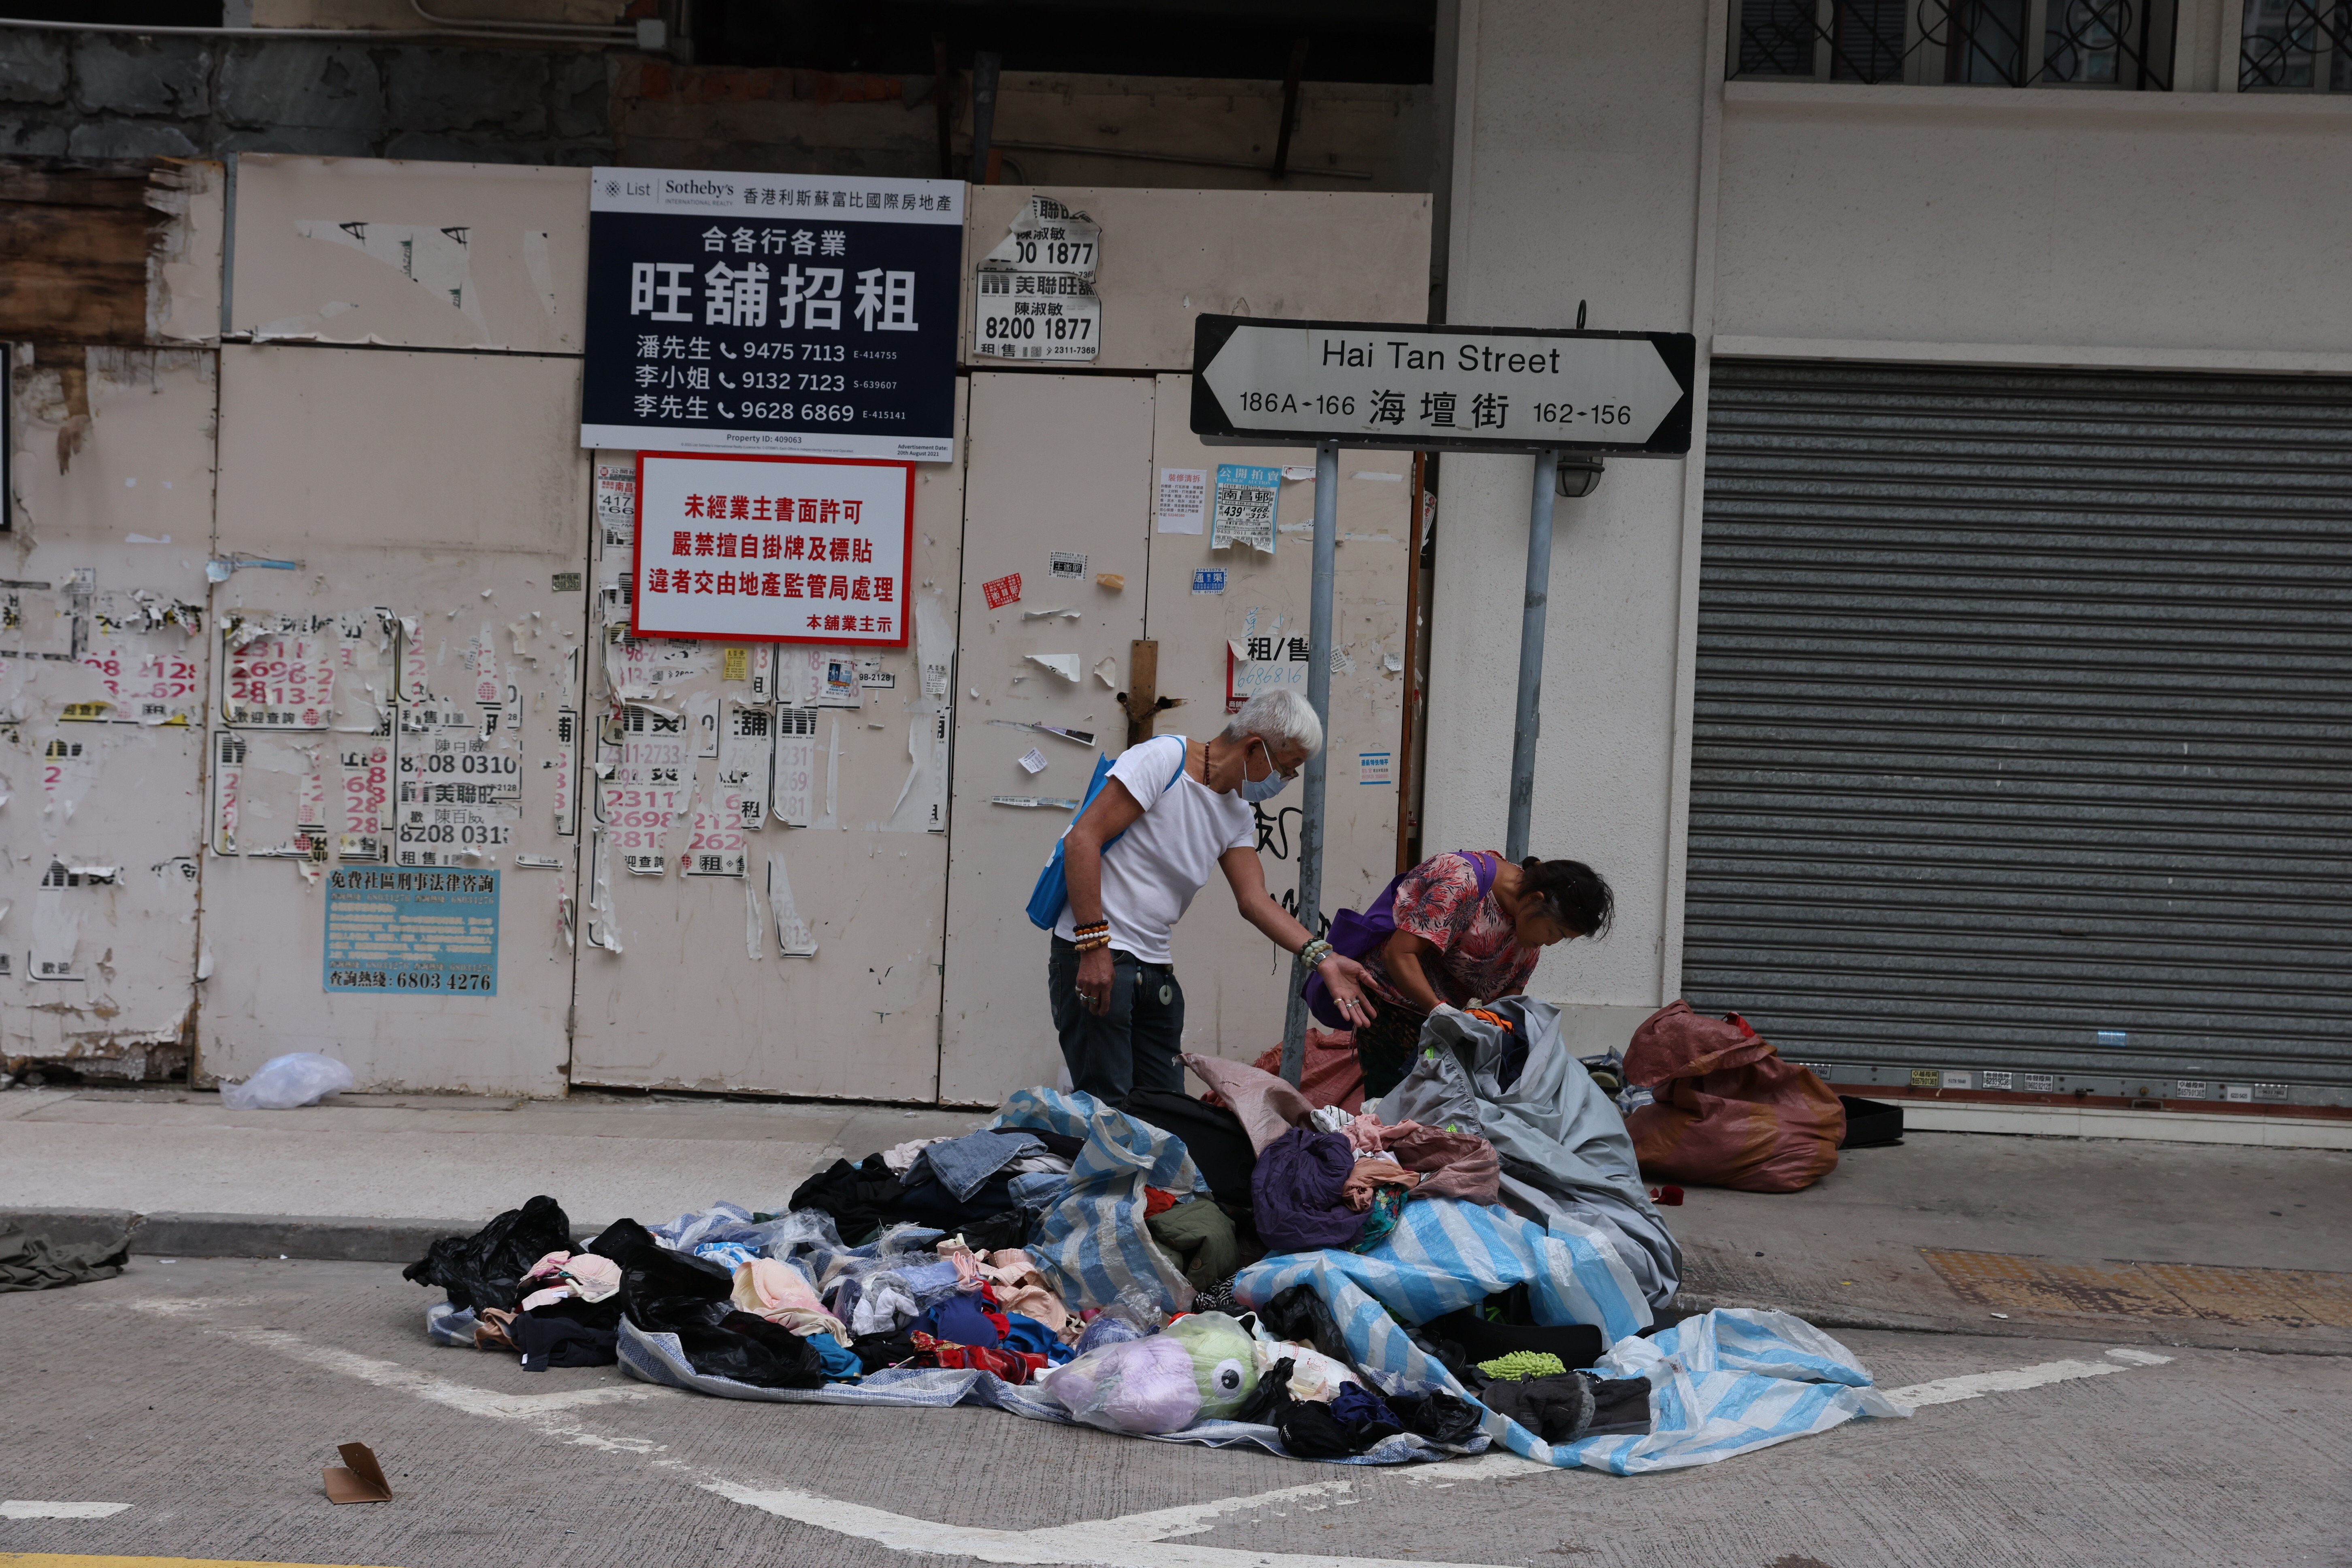 The Federation of Trade Unions wants the Hong Kong government to take extra measures to tackle poverty in the city. Photo: Nora Tam